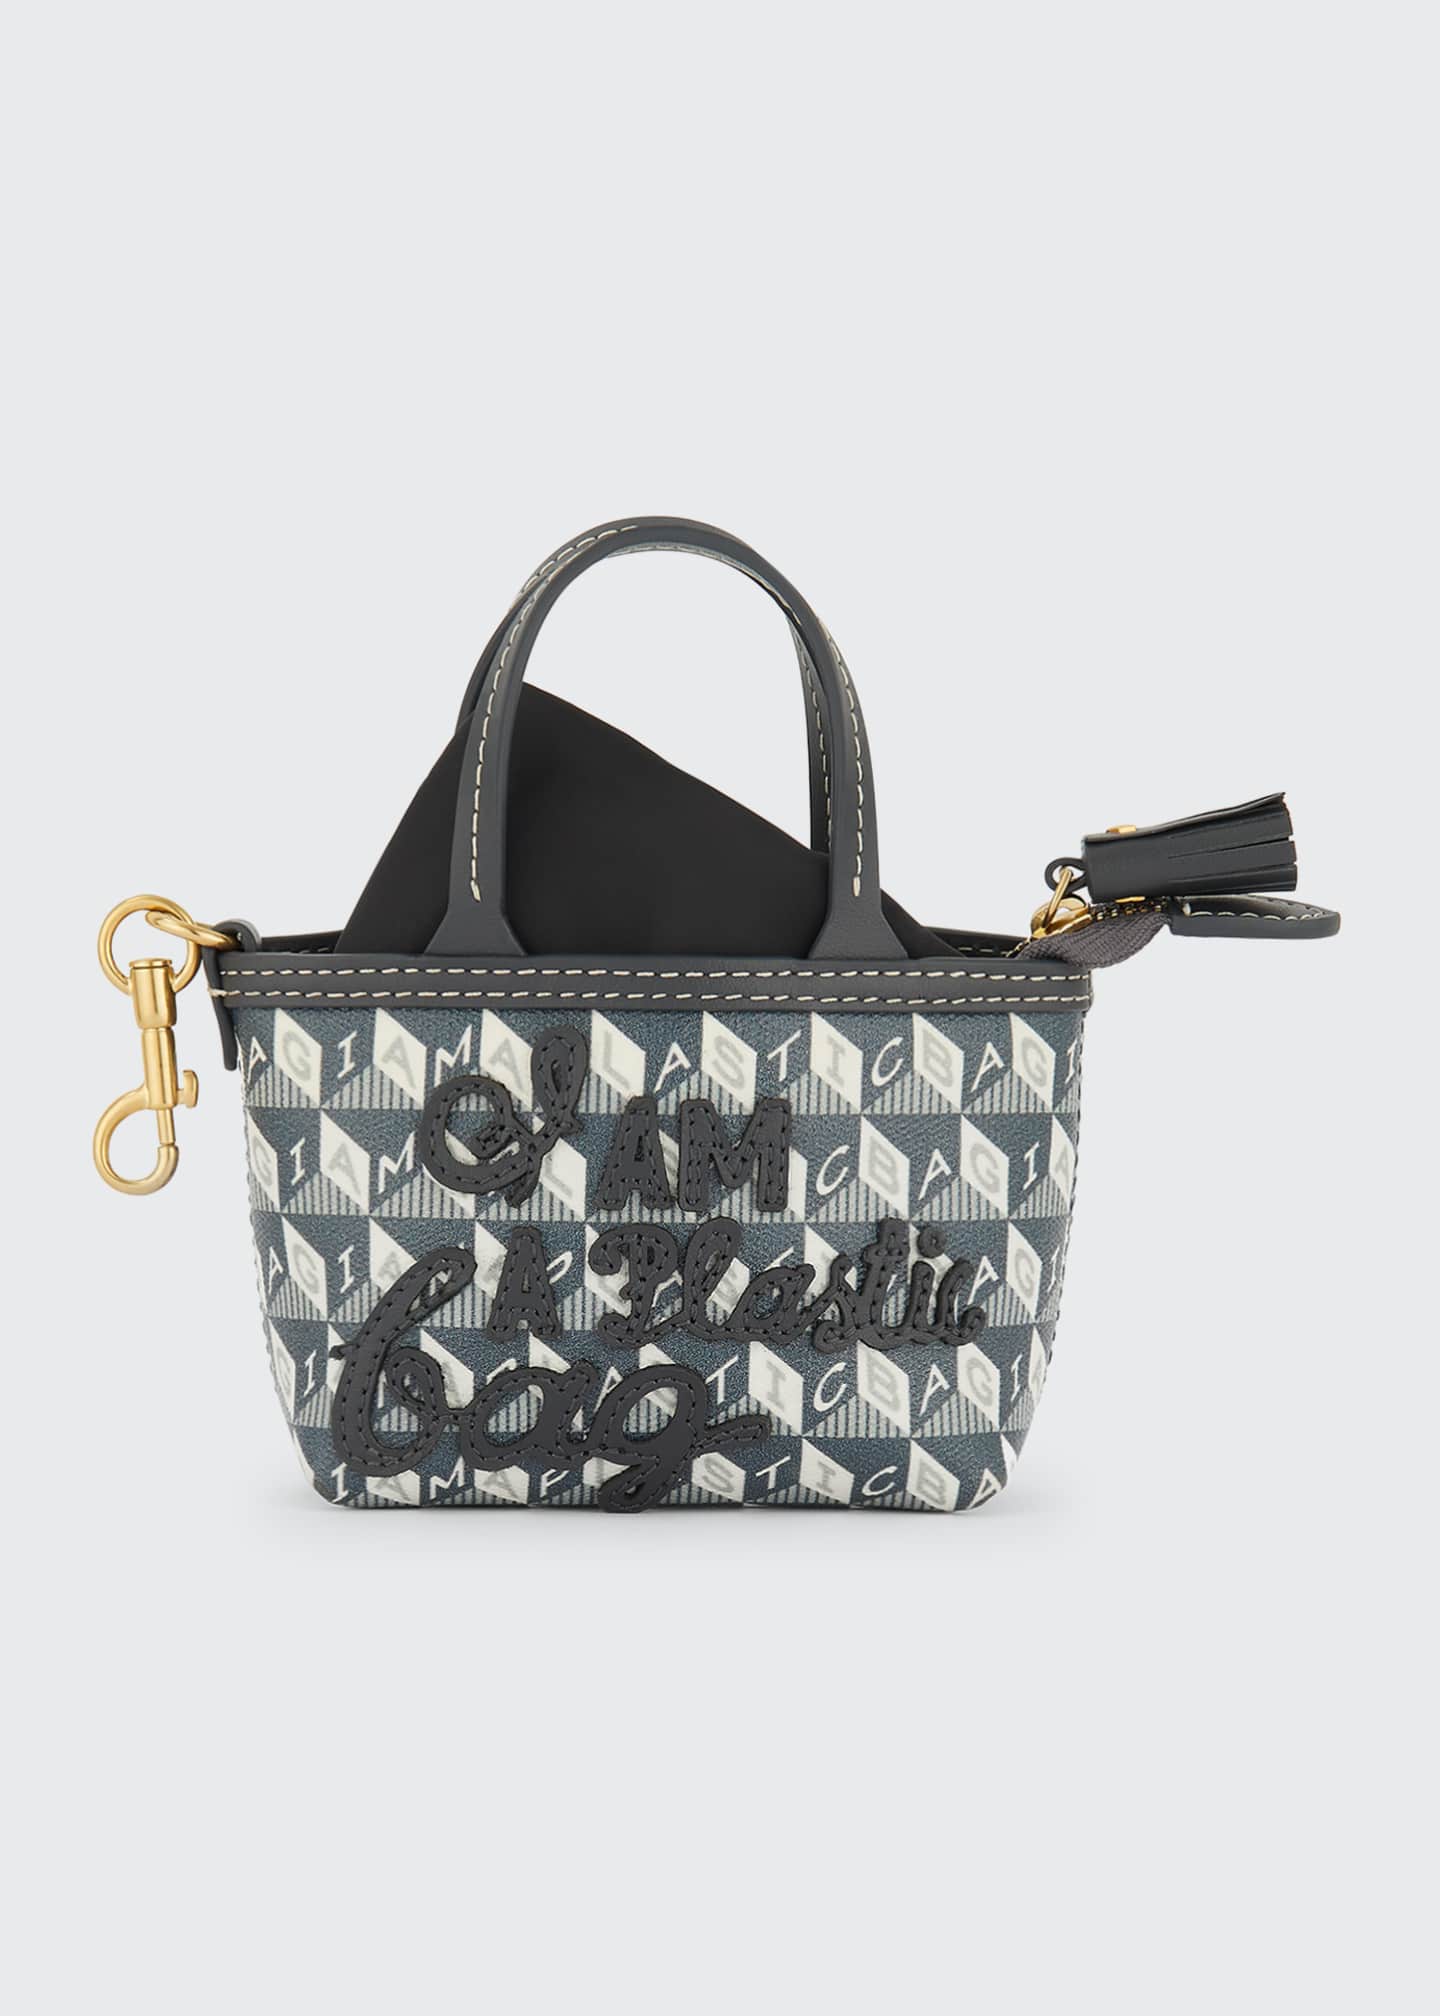 Shopper Tote Bag in Recycled Nylon With 'I Am A Plastic Bag' Charm | Bergdorf Goodman